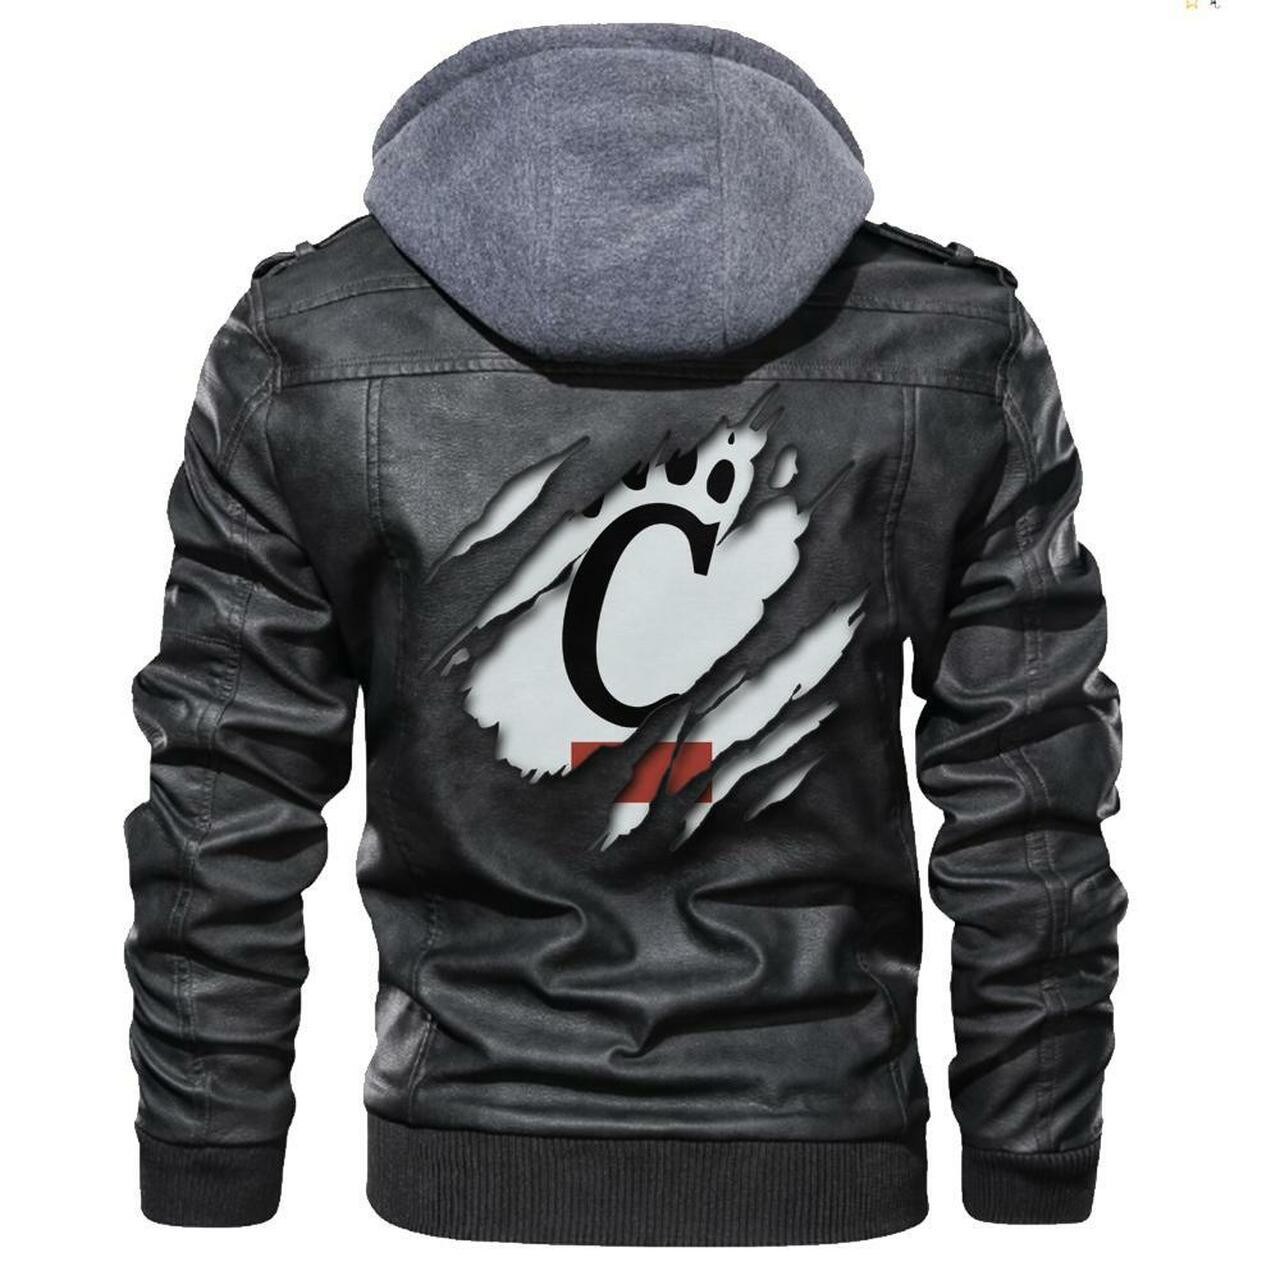 This leather Jacket will look great on you and make you stand out from the crowd 175